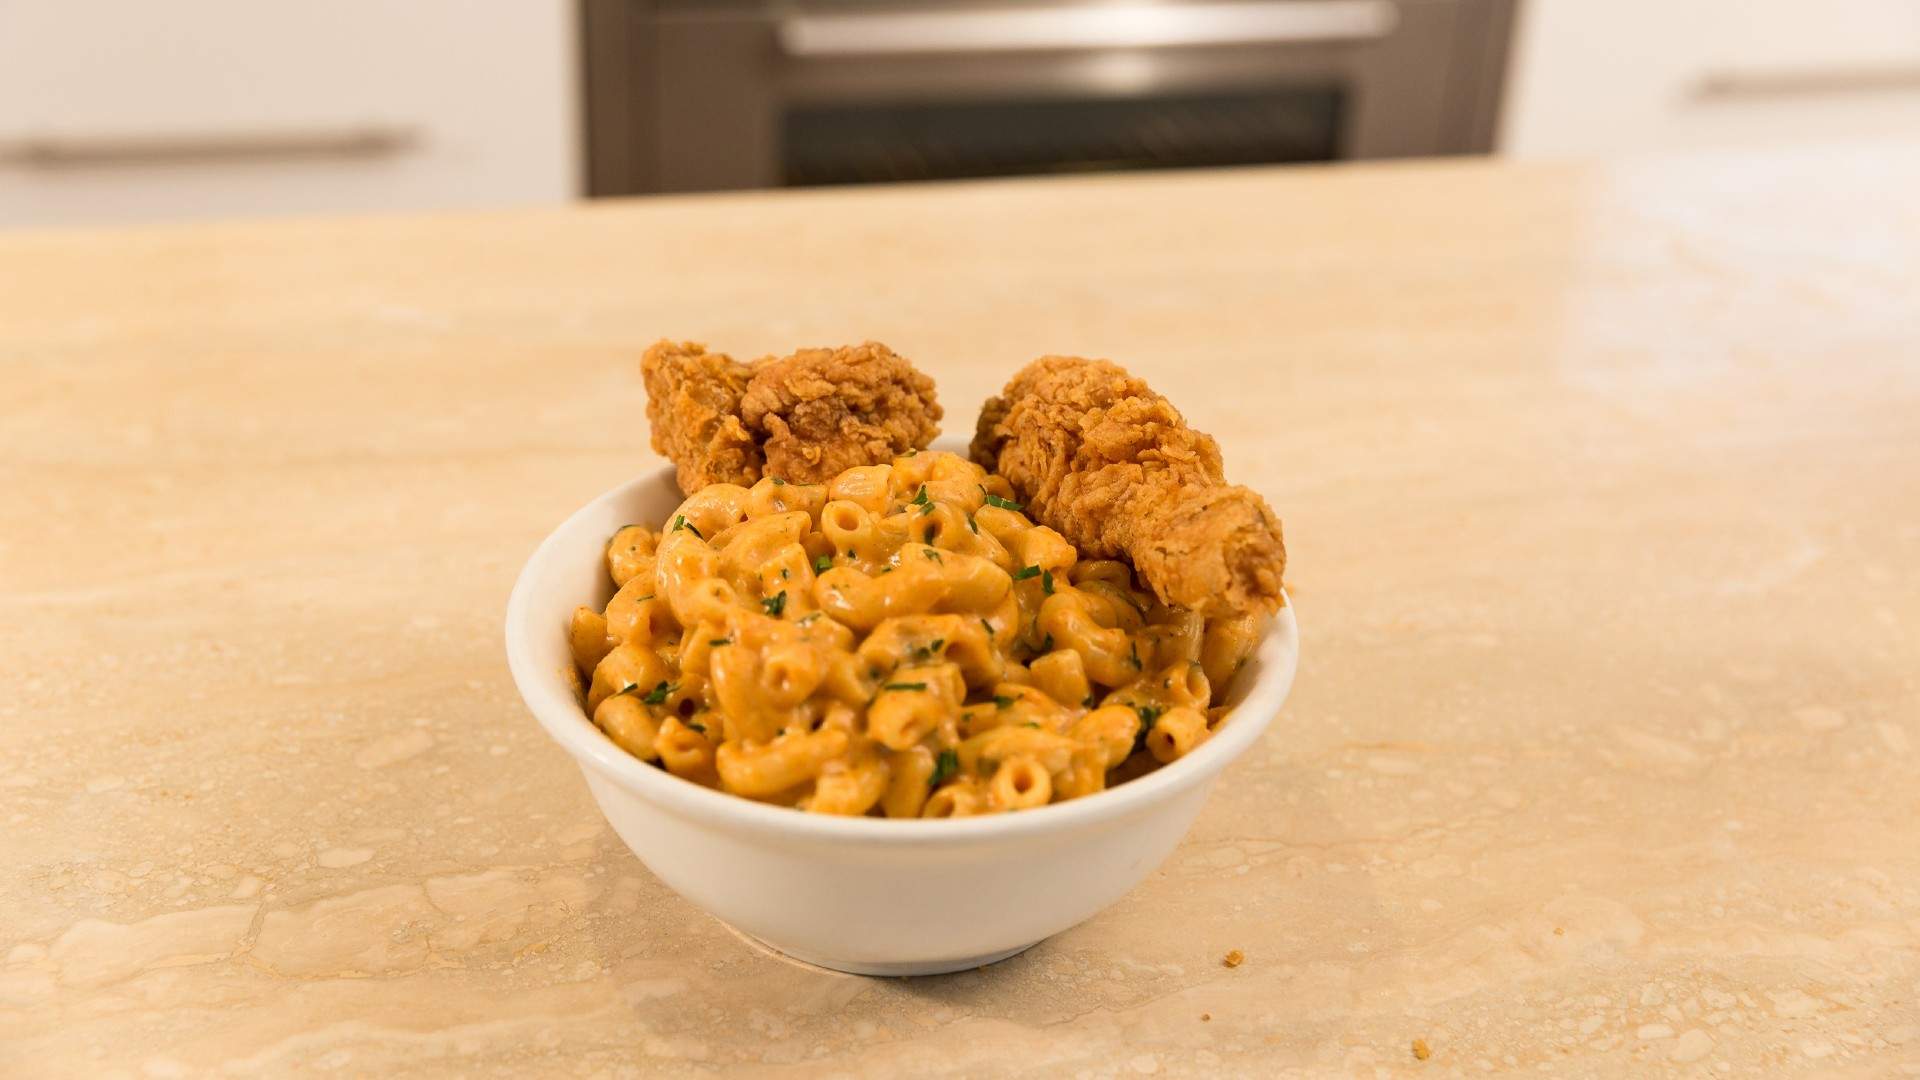 KFC's New Recipe for Hot and Spicy Mac 'n' Cheese Is Here to Satisfy Your Comfort-Food Cravings